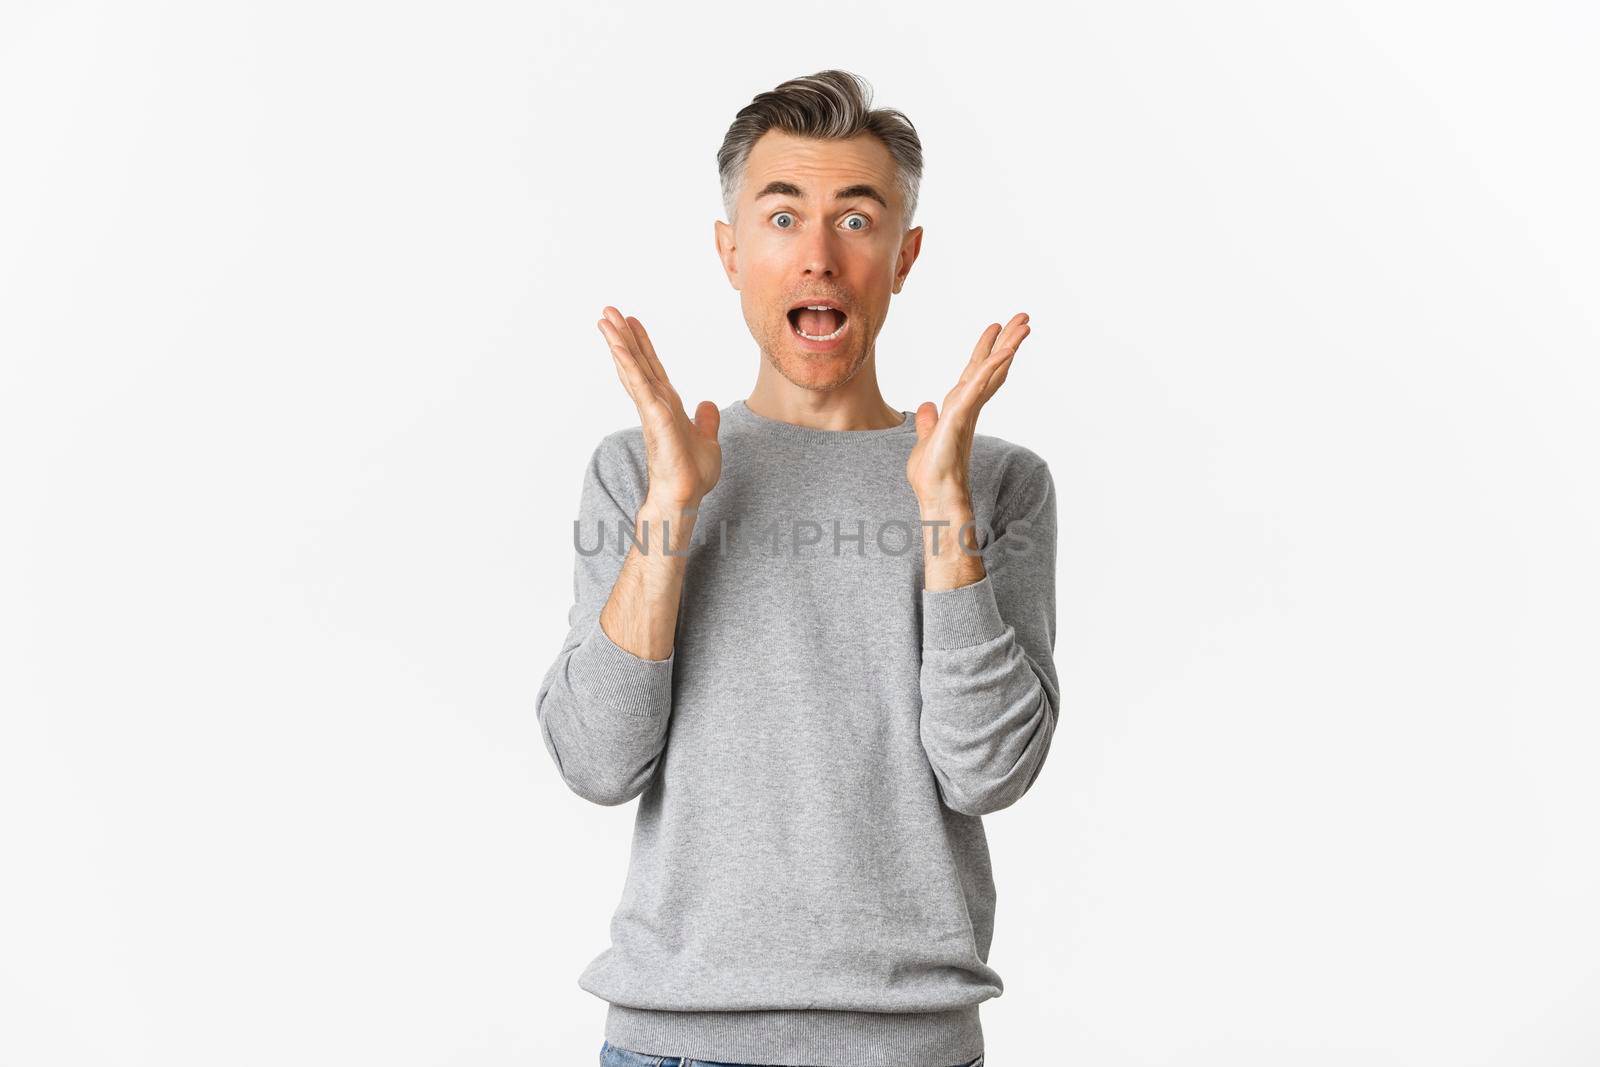 Surprised adult man with gray hair, saying wow and looking amazed, standing near white copy space in basic sweater.